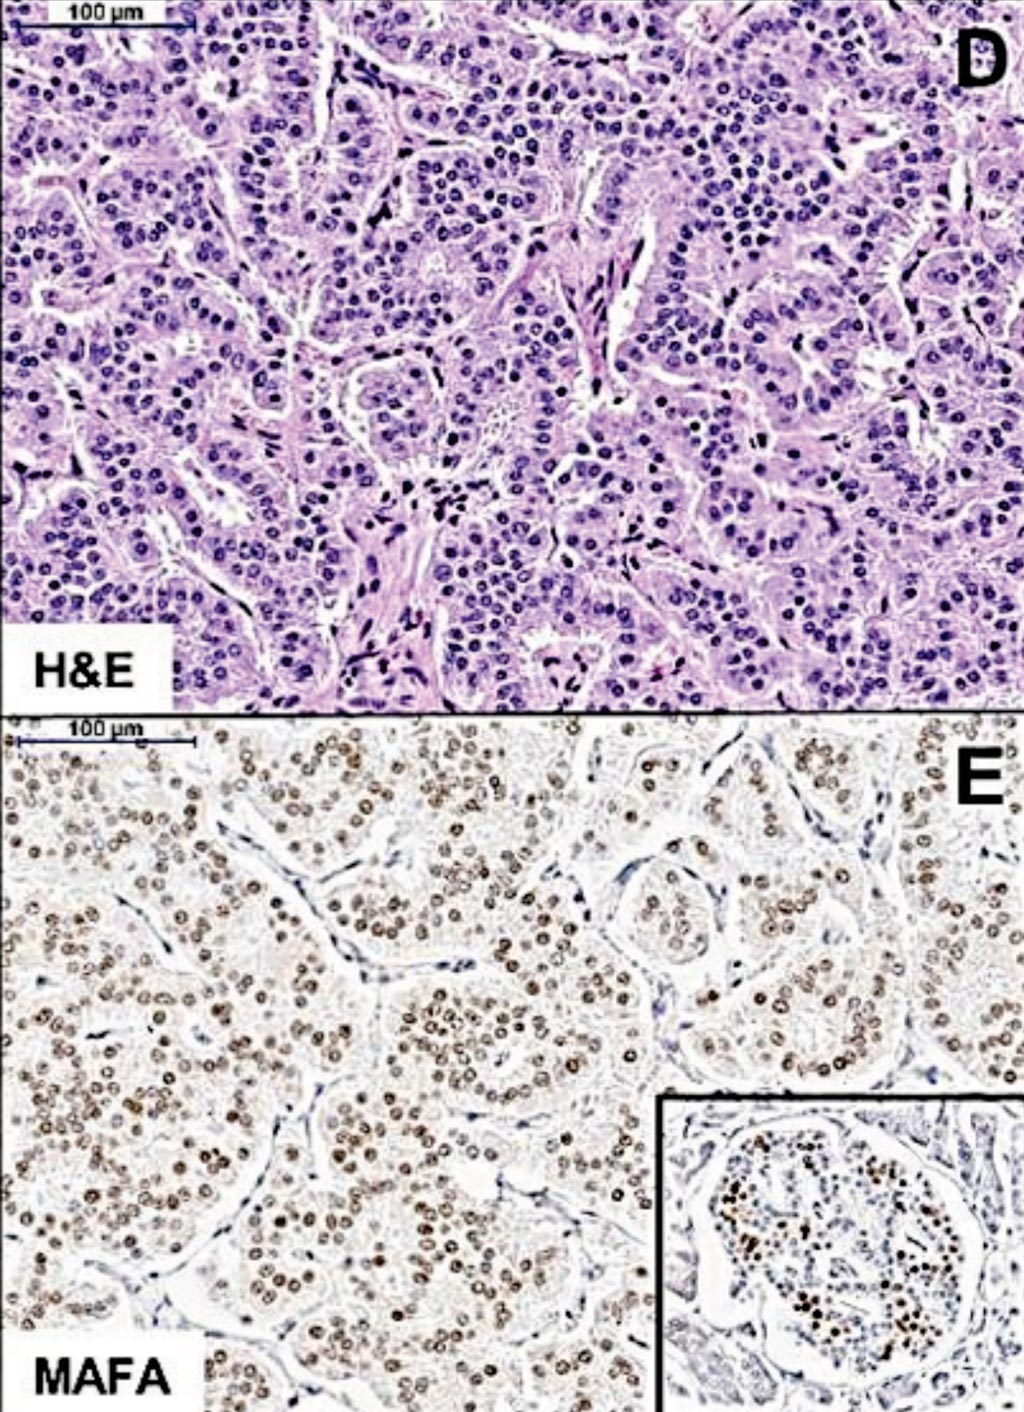 Image: Histopathology: (D) H&E staining showing the trabecular pattern of MAFA mutation-positive insulinomas. (E) Immunostaining shows diffuse MAFA expression in the tumor, at lower levels compared with the neighboring normal islets strongly expressing MAFA (Inset) (Photo courtesy of the Queen Mary University of London).